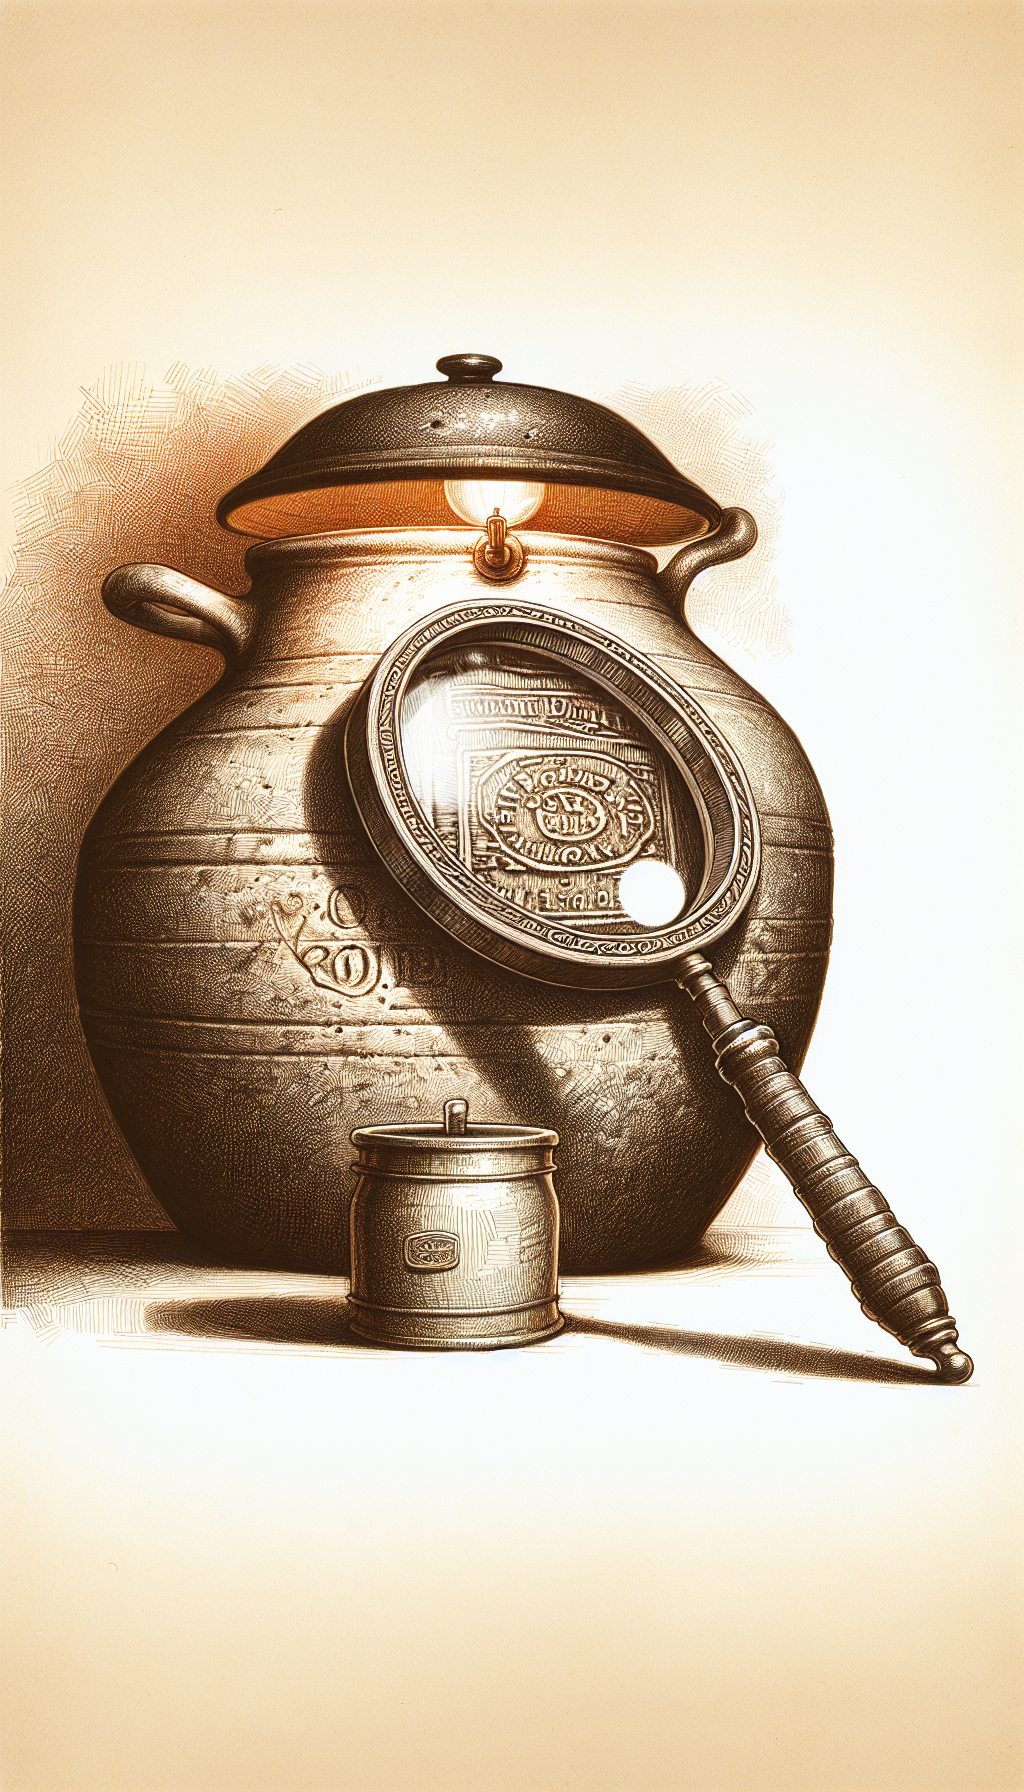 An old, textured 10-gallon crock sits center stage, partially lit by a vintage lamp's soft glow. Upon its rounded belly is a magnifying glass that clearly highlights a maker's intricate stamp and authentic signature, whispering of its storied past and value. The illustration varies in style: realistic crock textures juxtaposed with whimsical, sketched magnifying glass and illuminated stamp details.